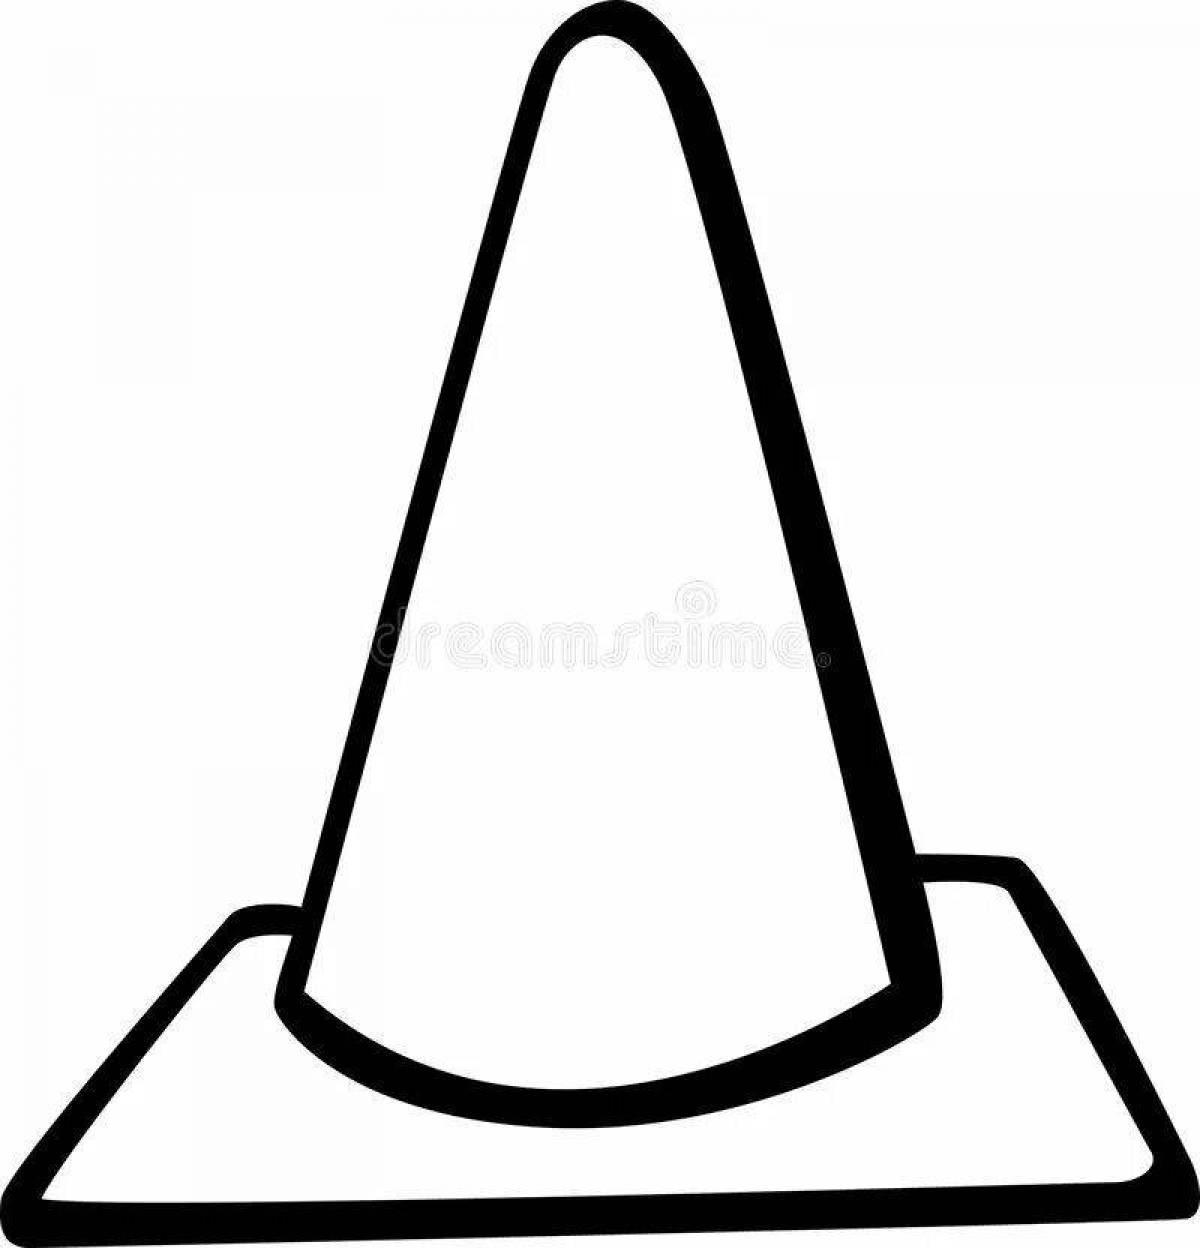 Fun coloring pages of traffic cones